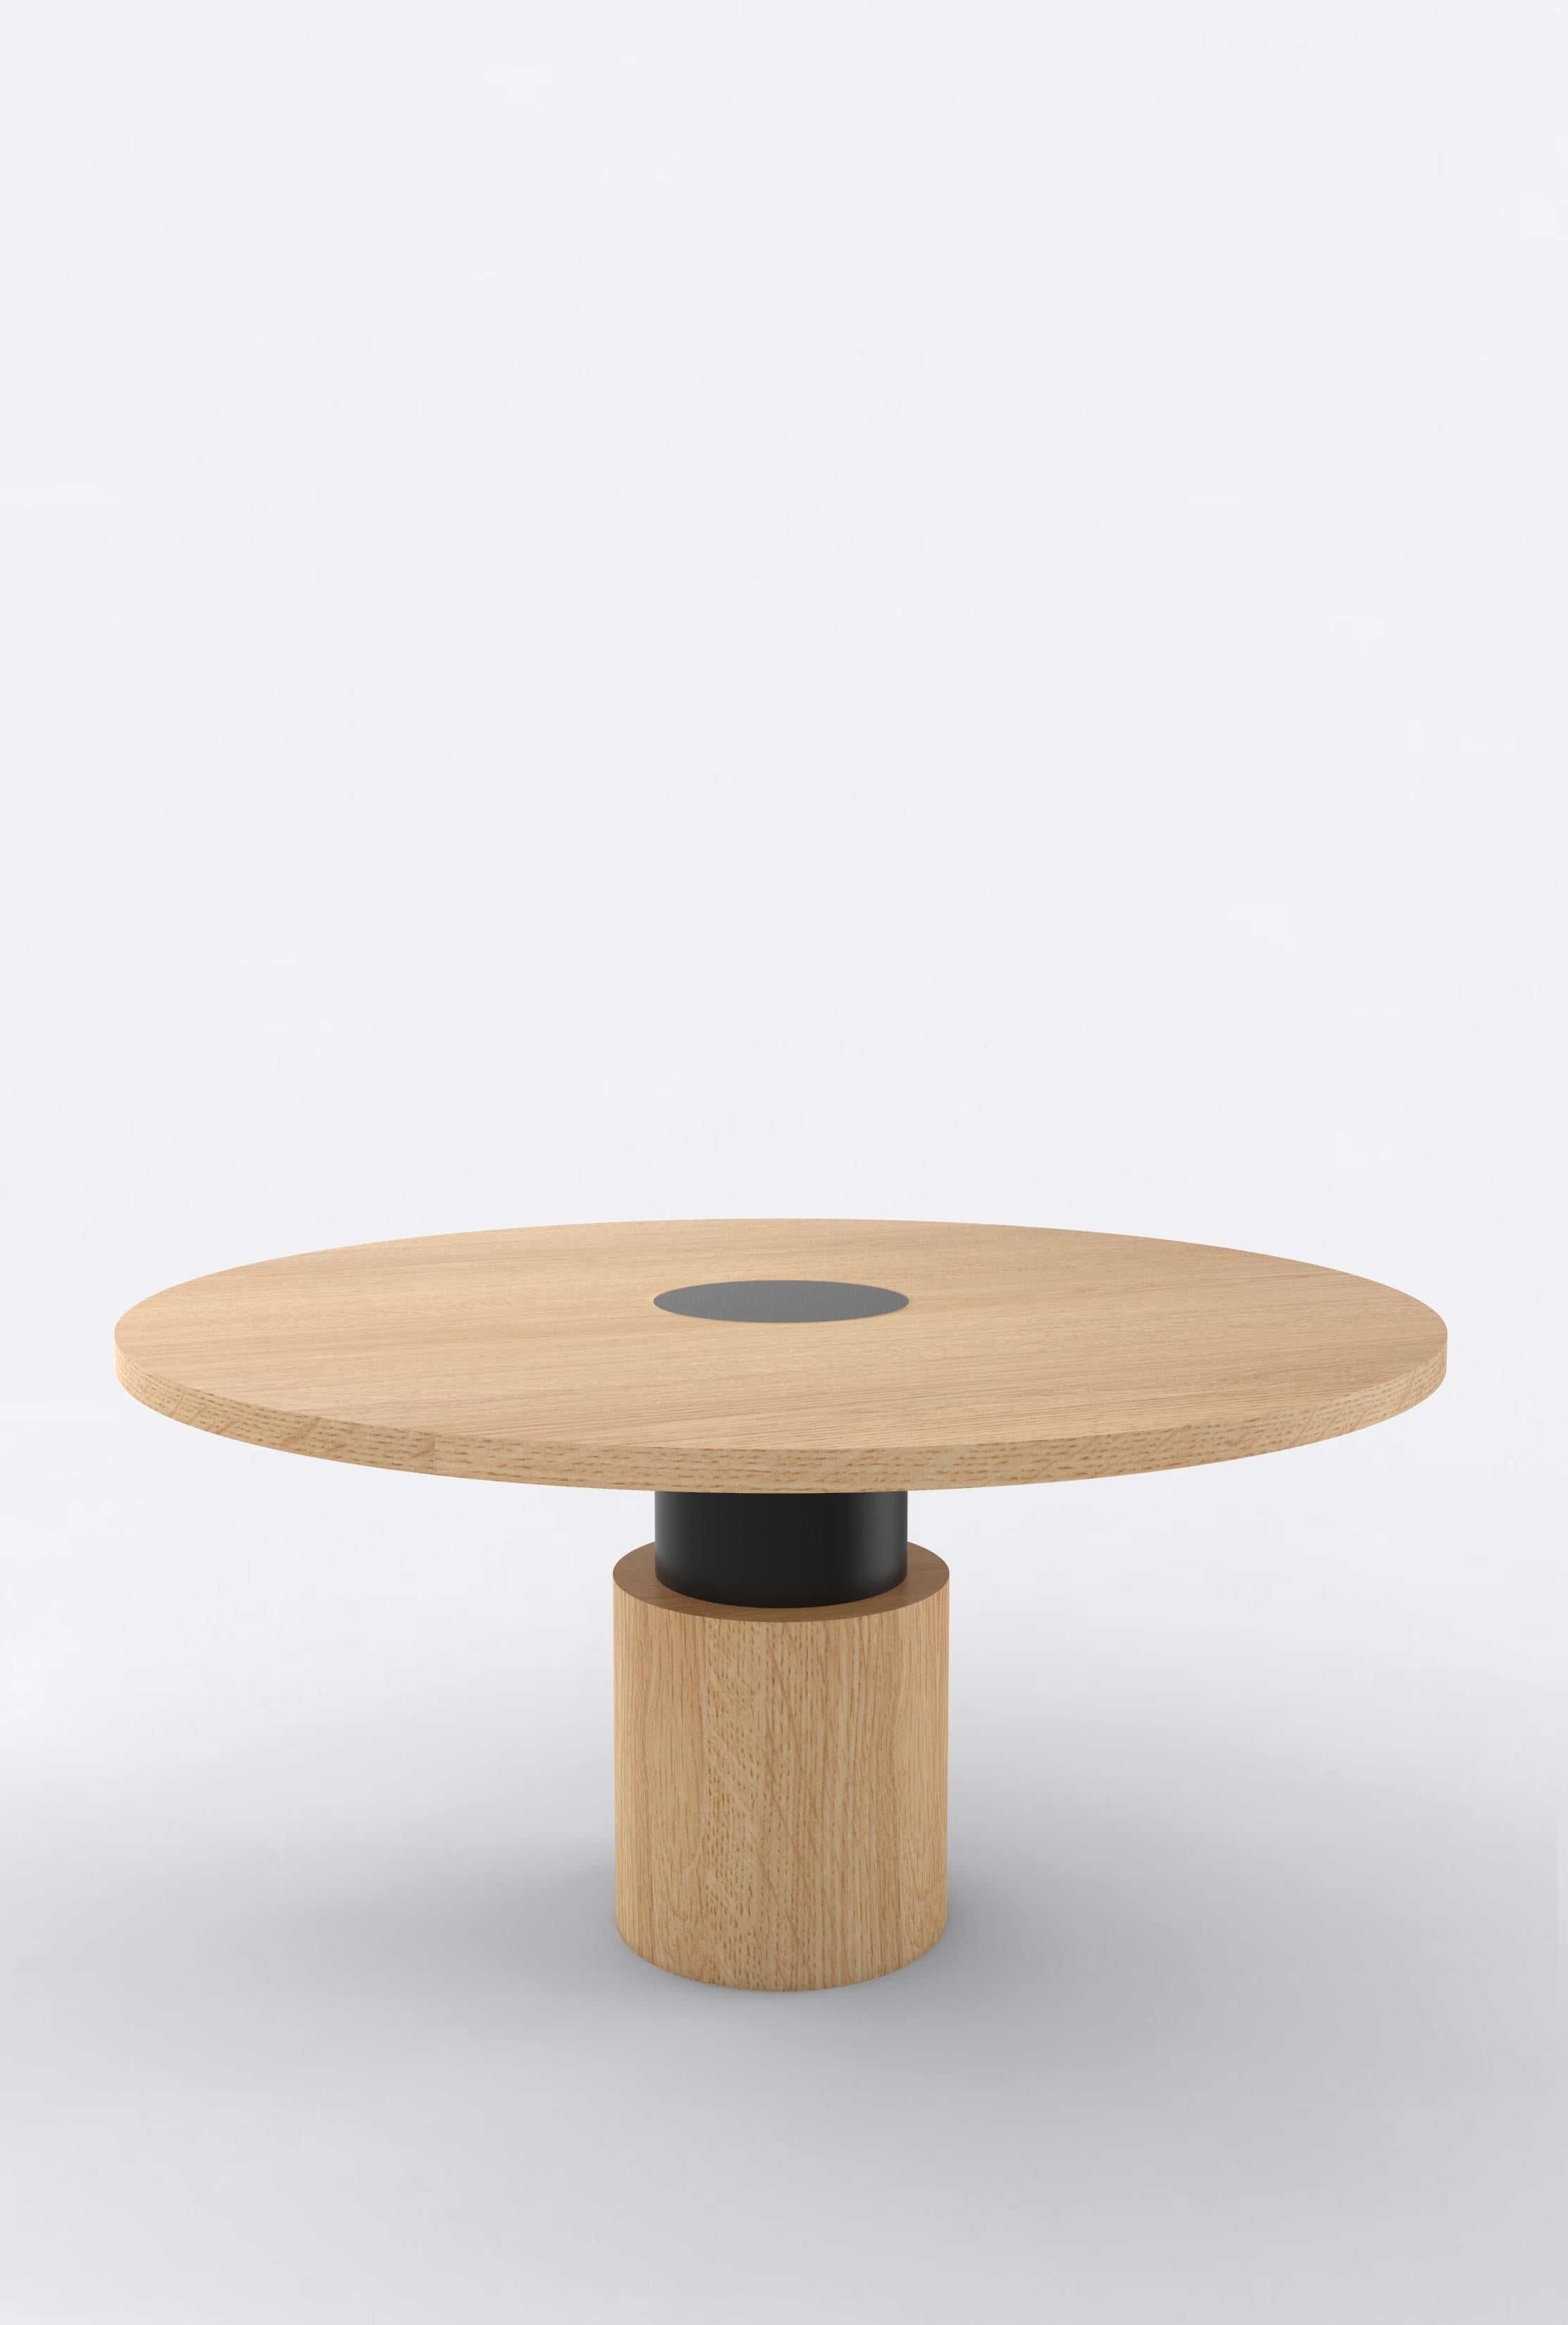 Orphan work 100 Dining Table, 2019
Shown in oak with black.
Available in natural oak with painted base.
Measures: 60